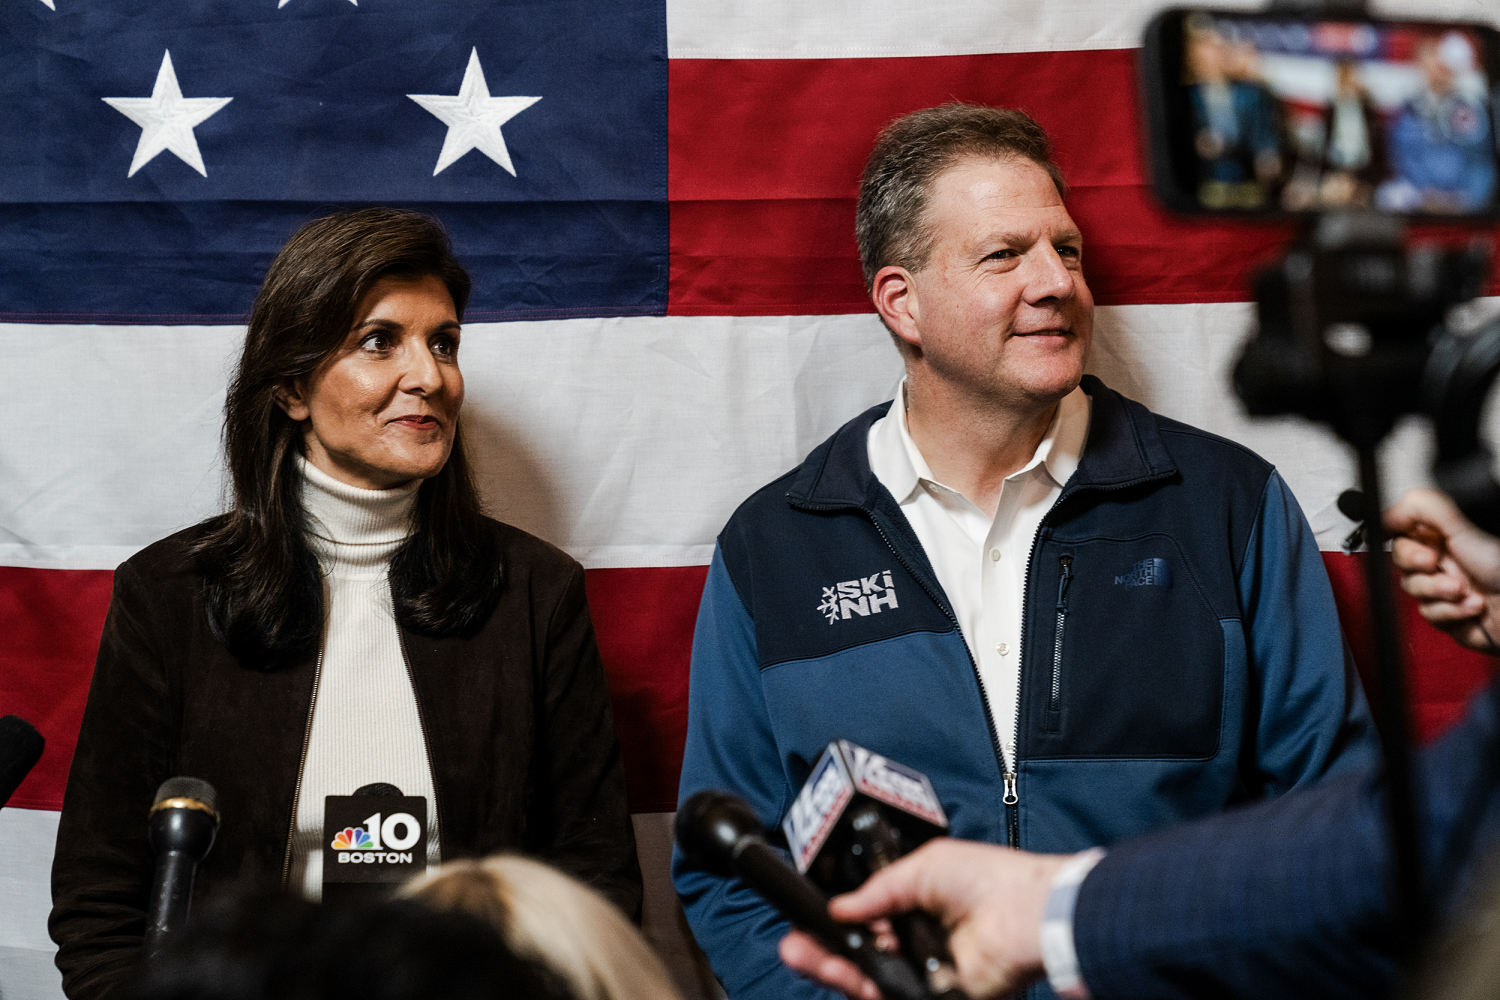 chris sununu won’t say whether haley will stay in the race if she loses south carolina